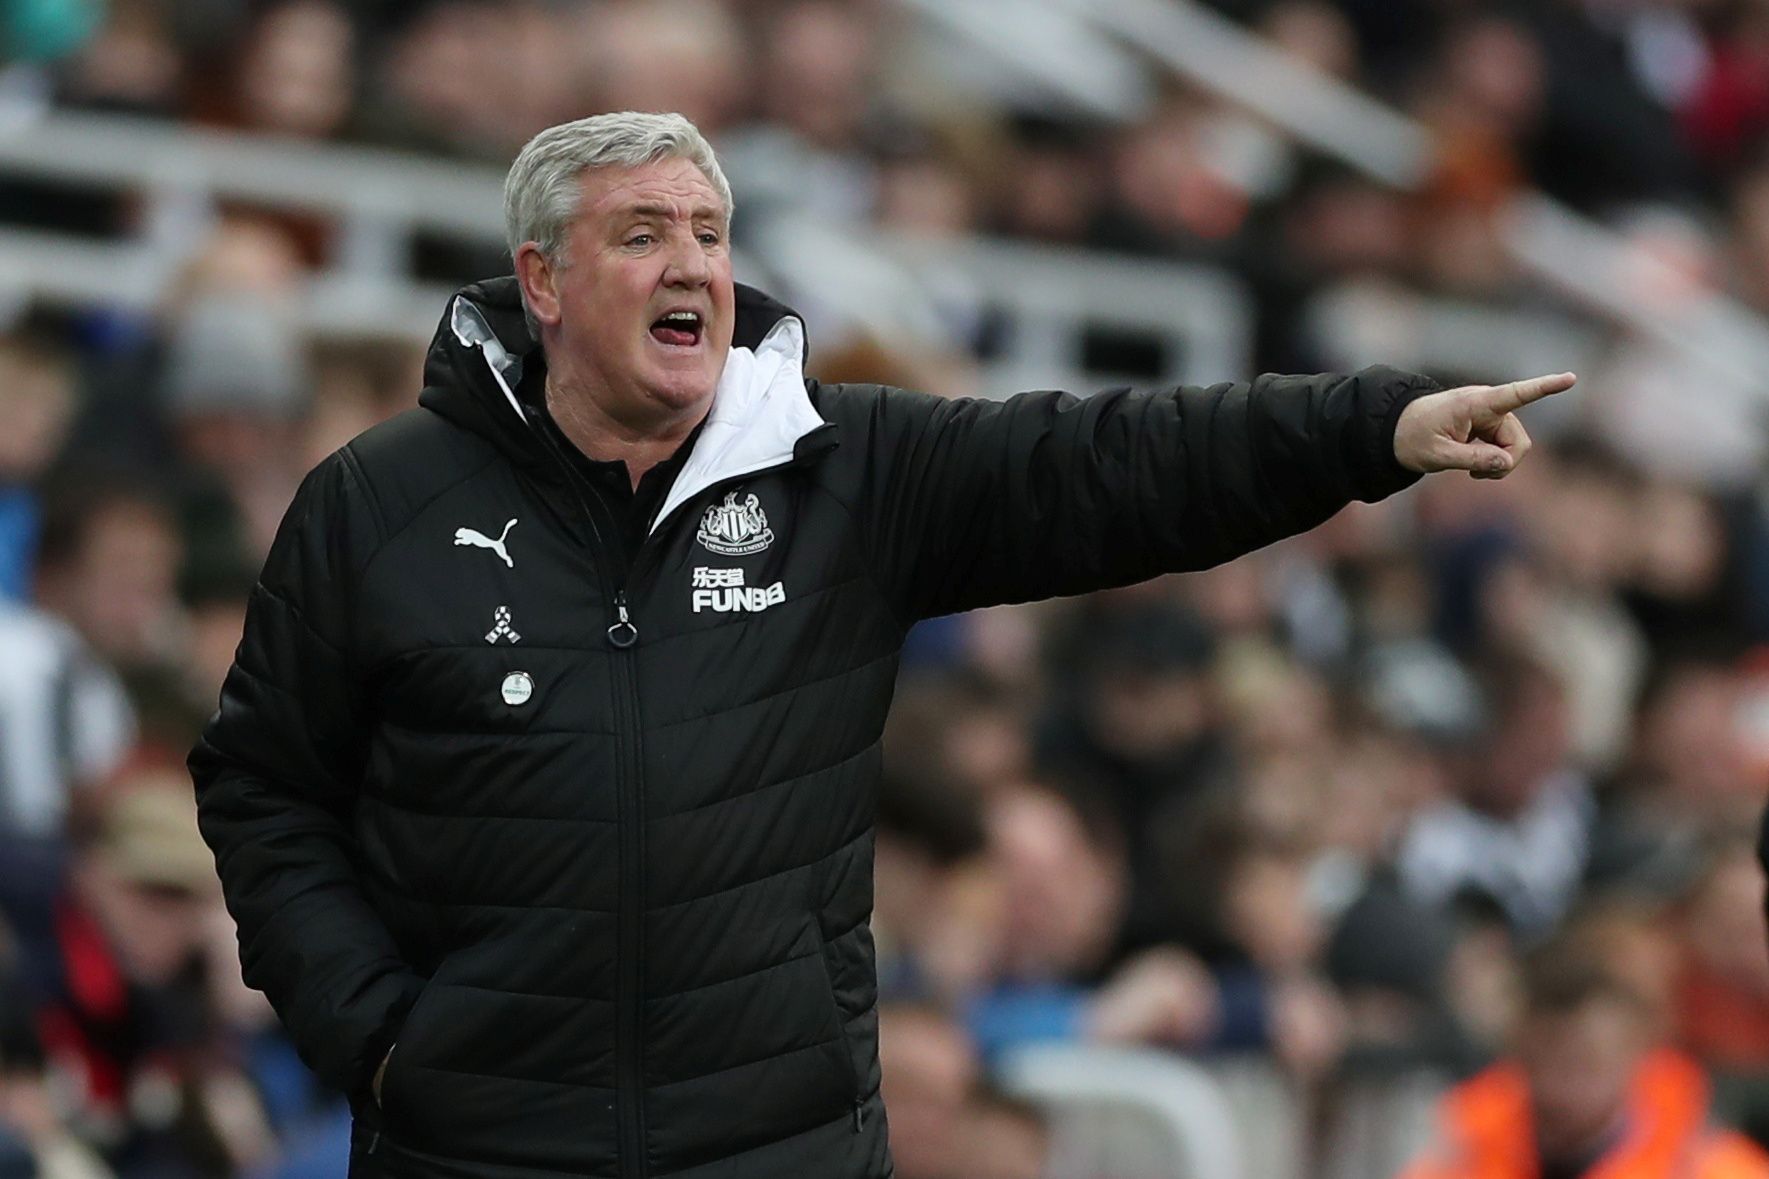 Soccer Football - FA Cup Fourth Round - Newcastle United v Oxford United - St James' Park, Newcastle, Britain - January 25, 2020  Newcastle United manager Steve Bruce   Action Images via Reuters/Lee Smith